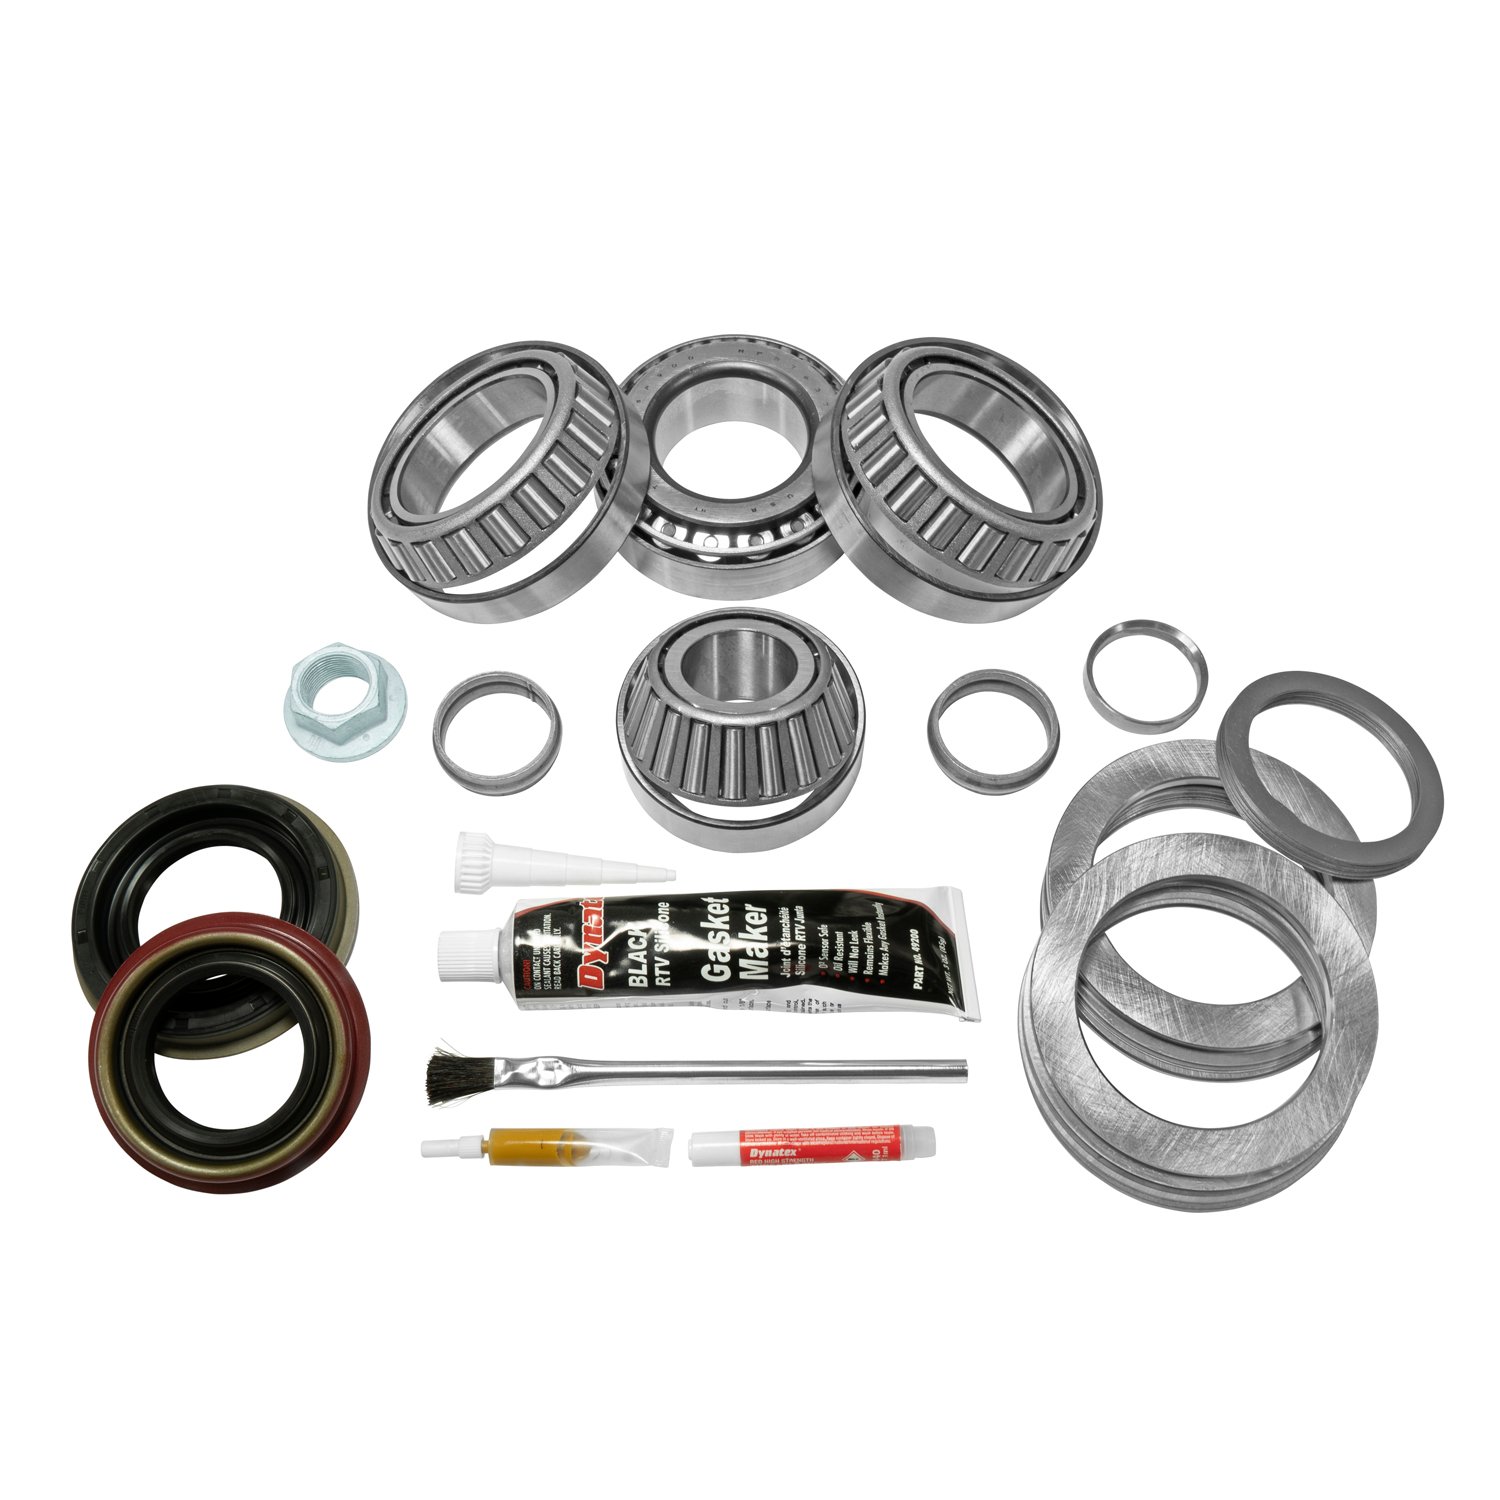 Master Overhaul Kit For '08-'10 Ford 9.75 in. Differential.